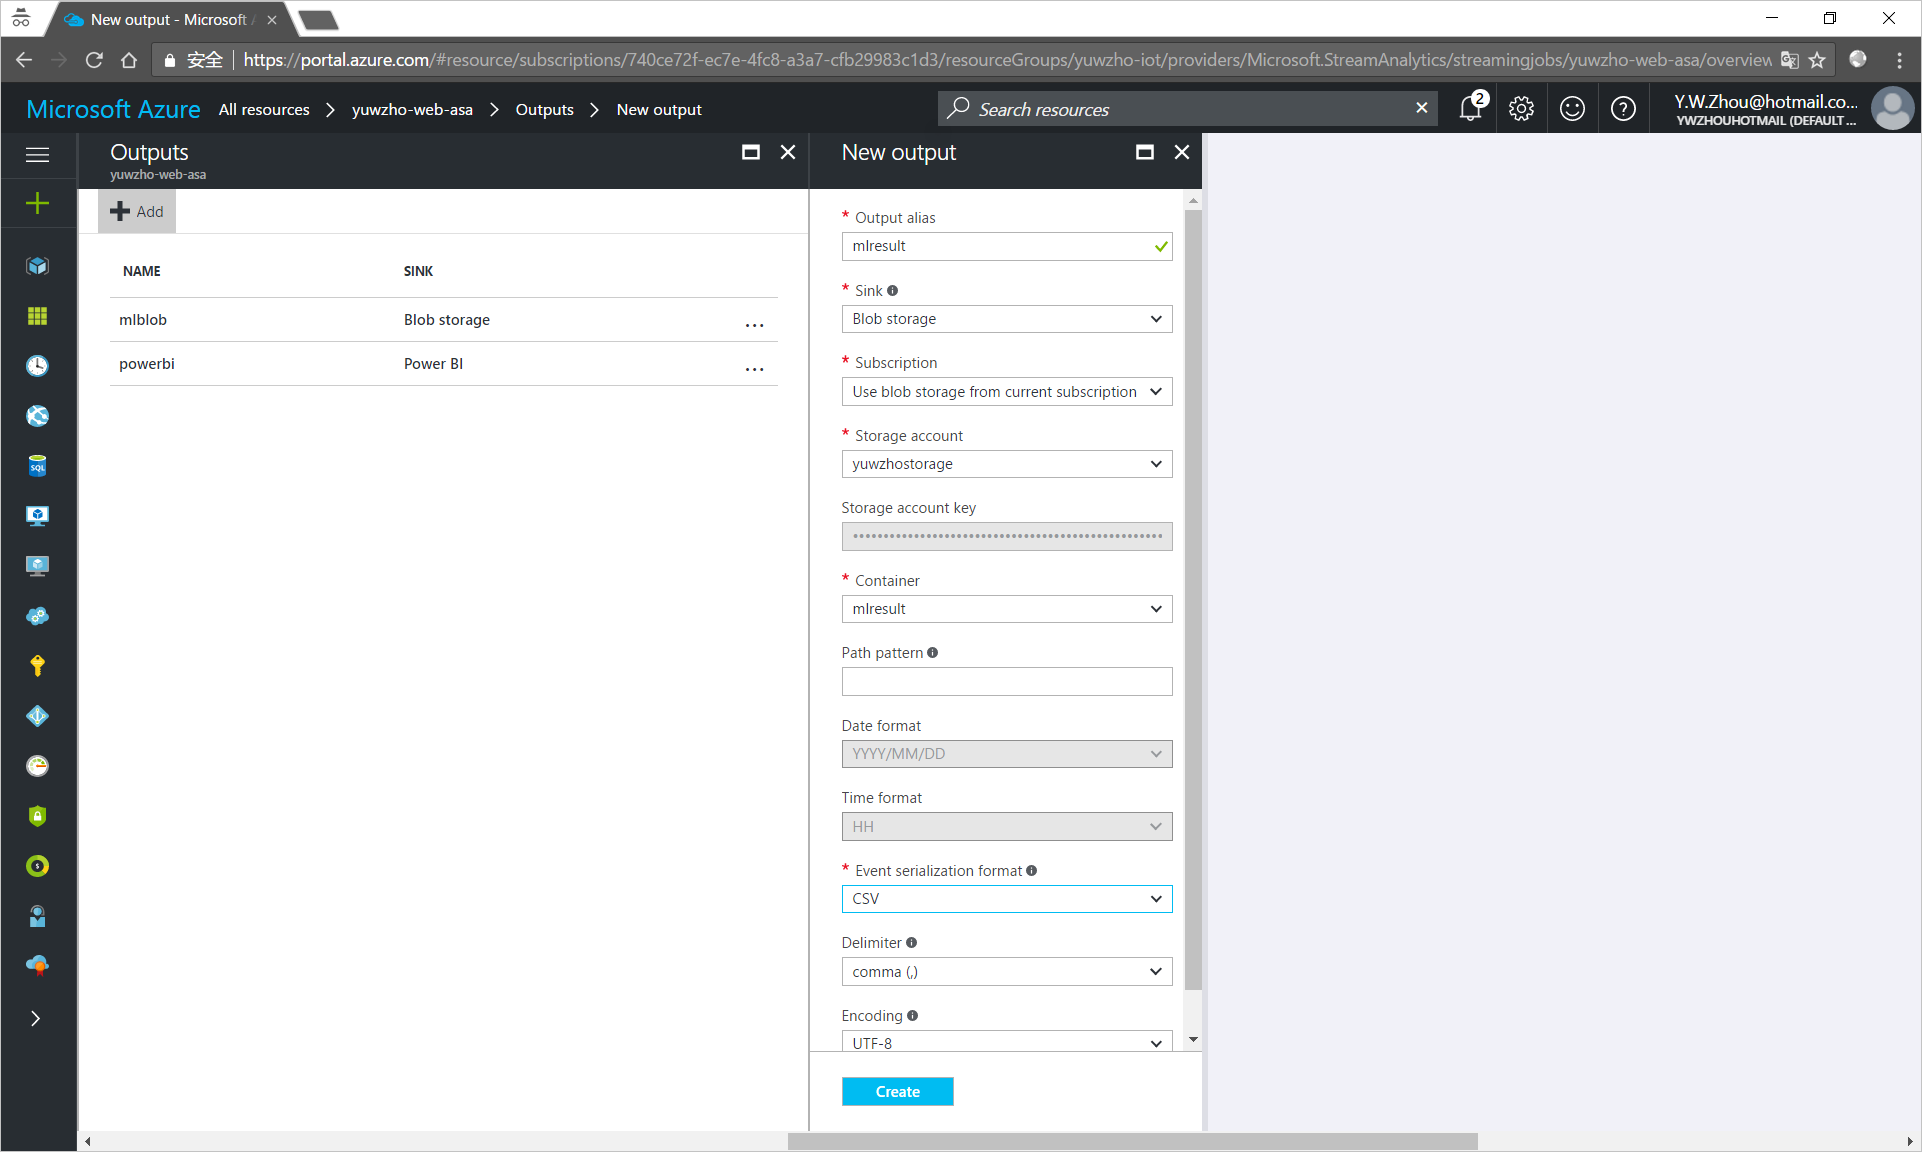 Add an output to the Stream Analytics job in Azure